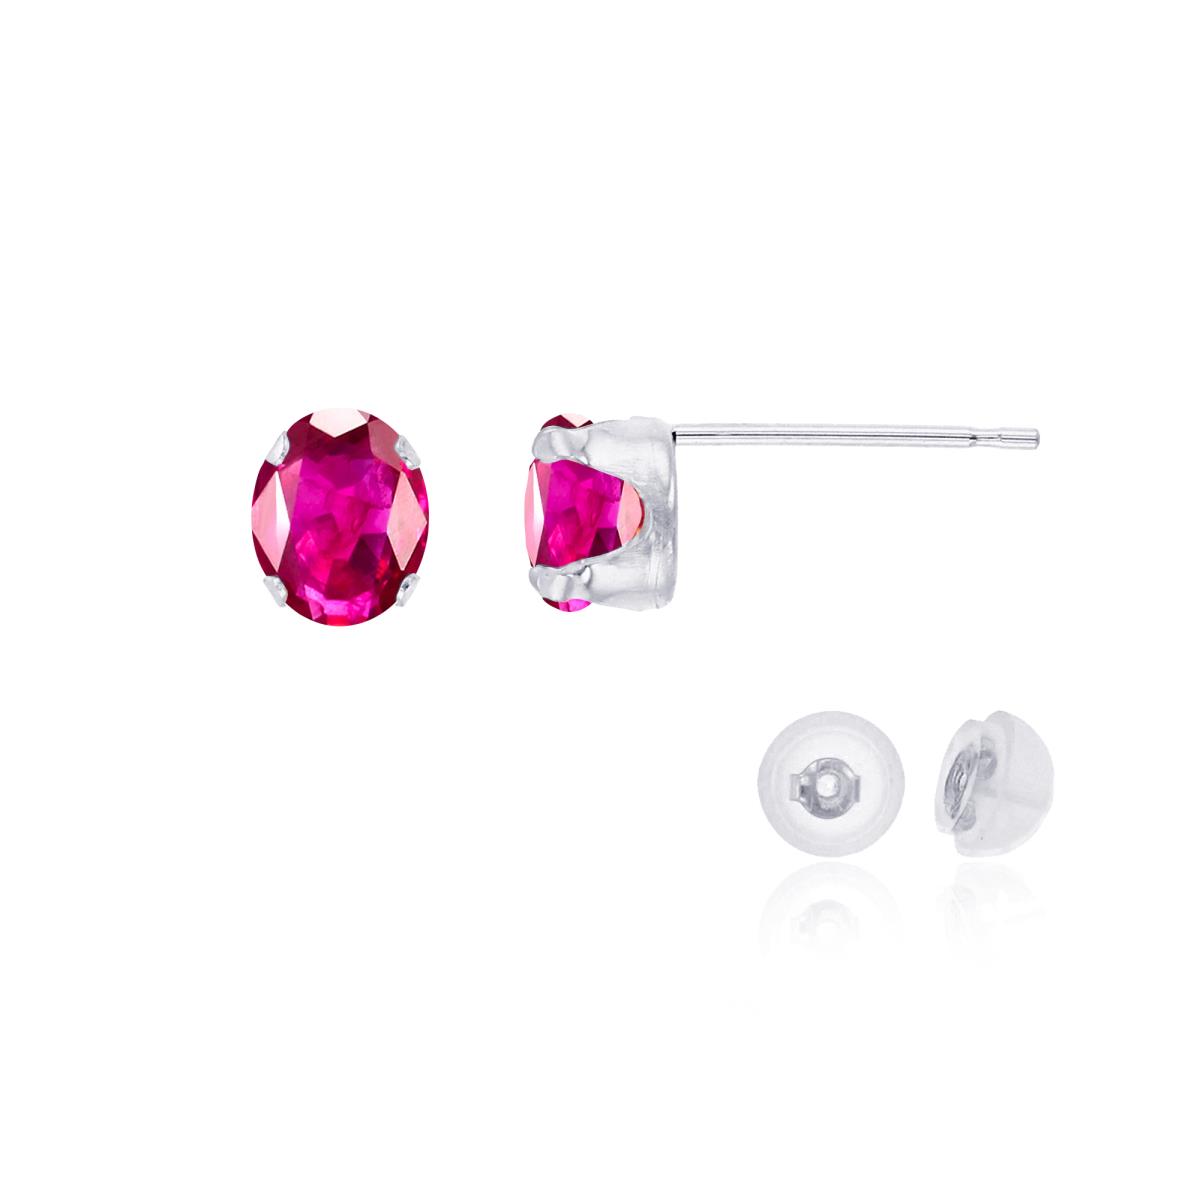 10K White Gold 6x4mm Oval Glass Filled Ruby Stud Earring with Silicone Back